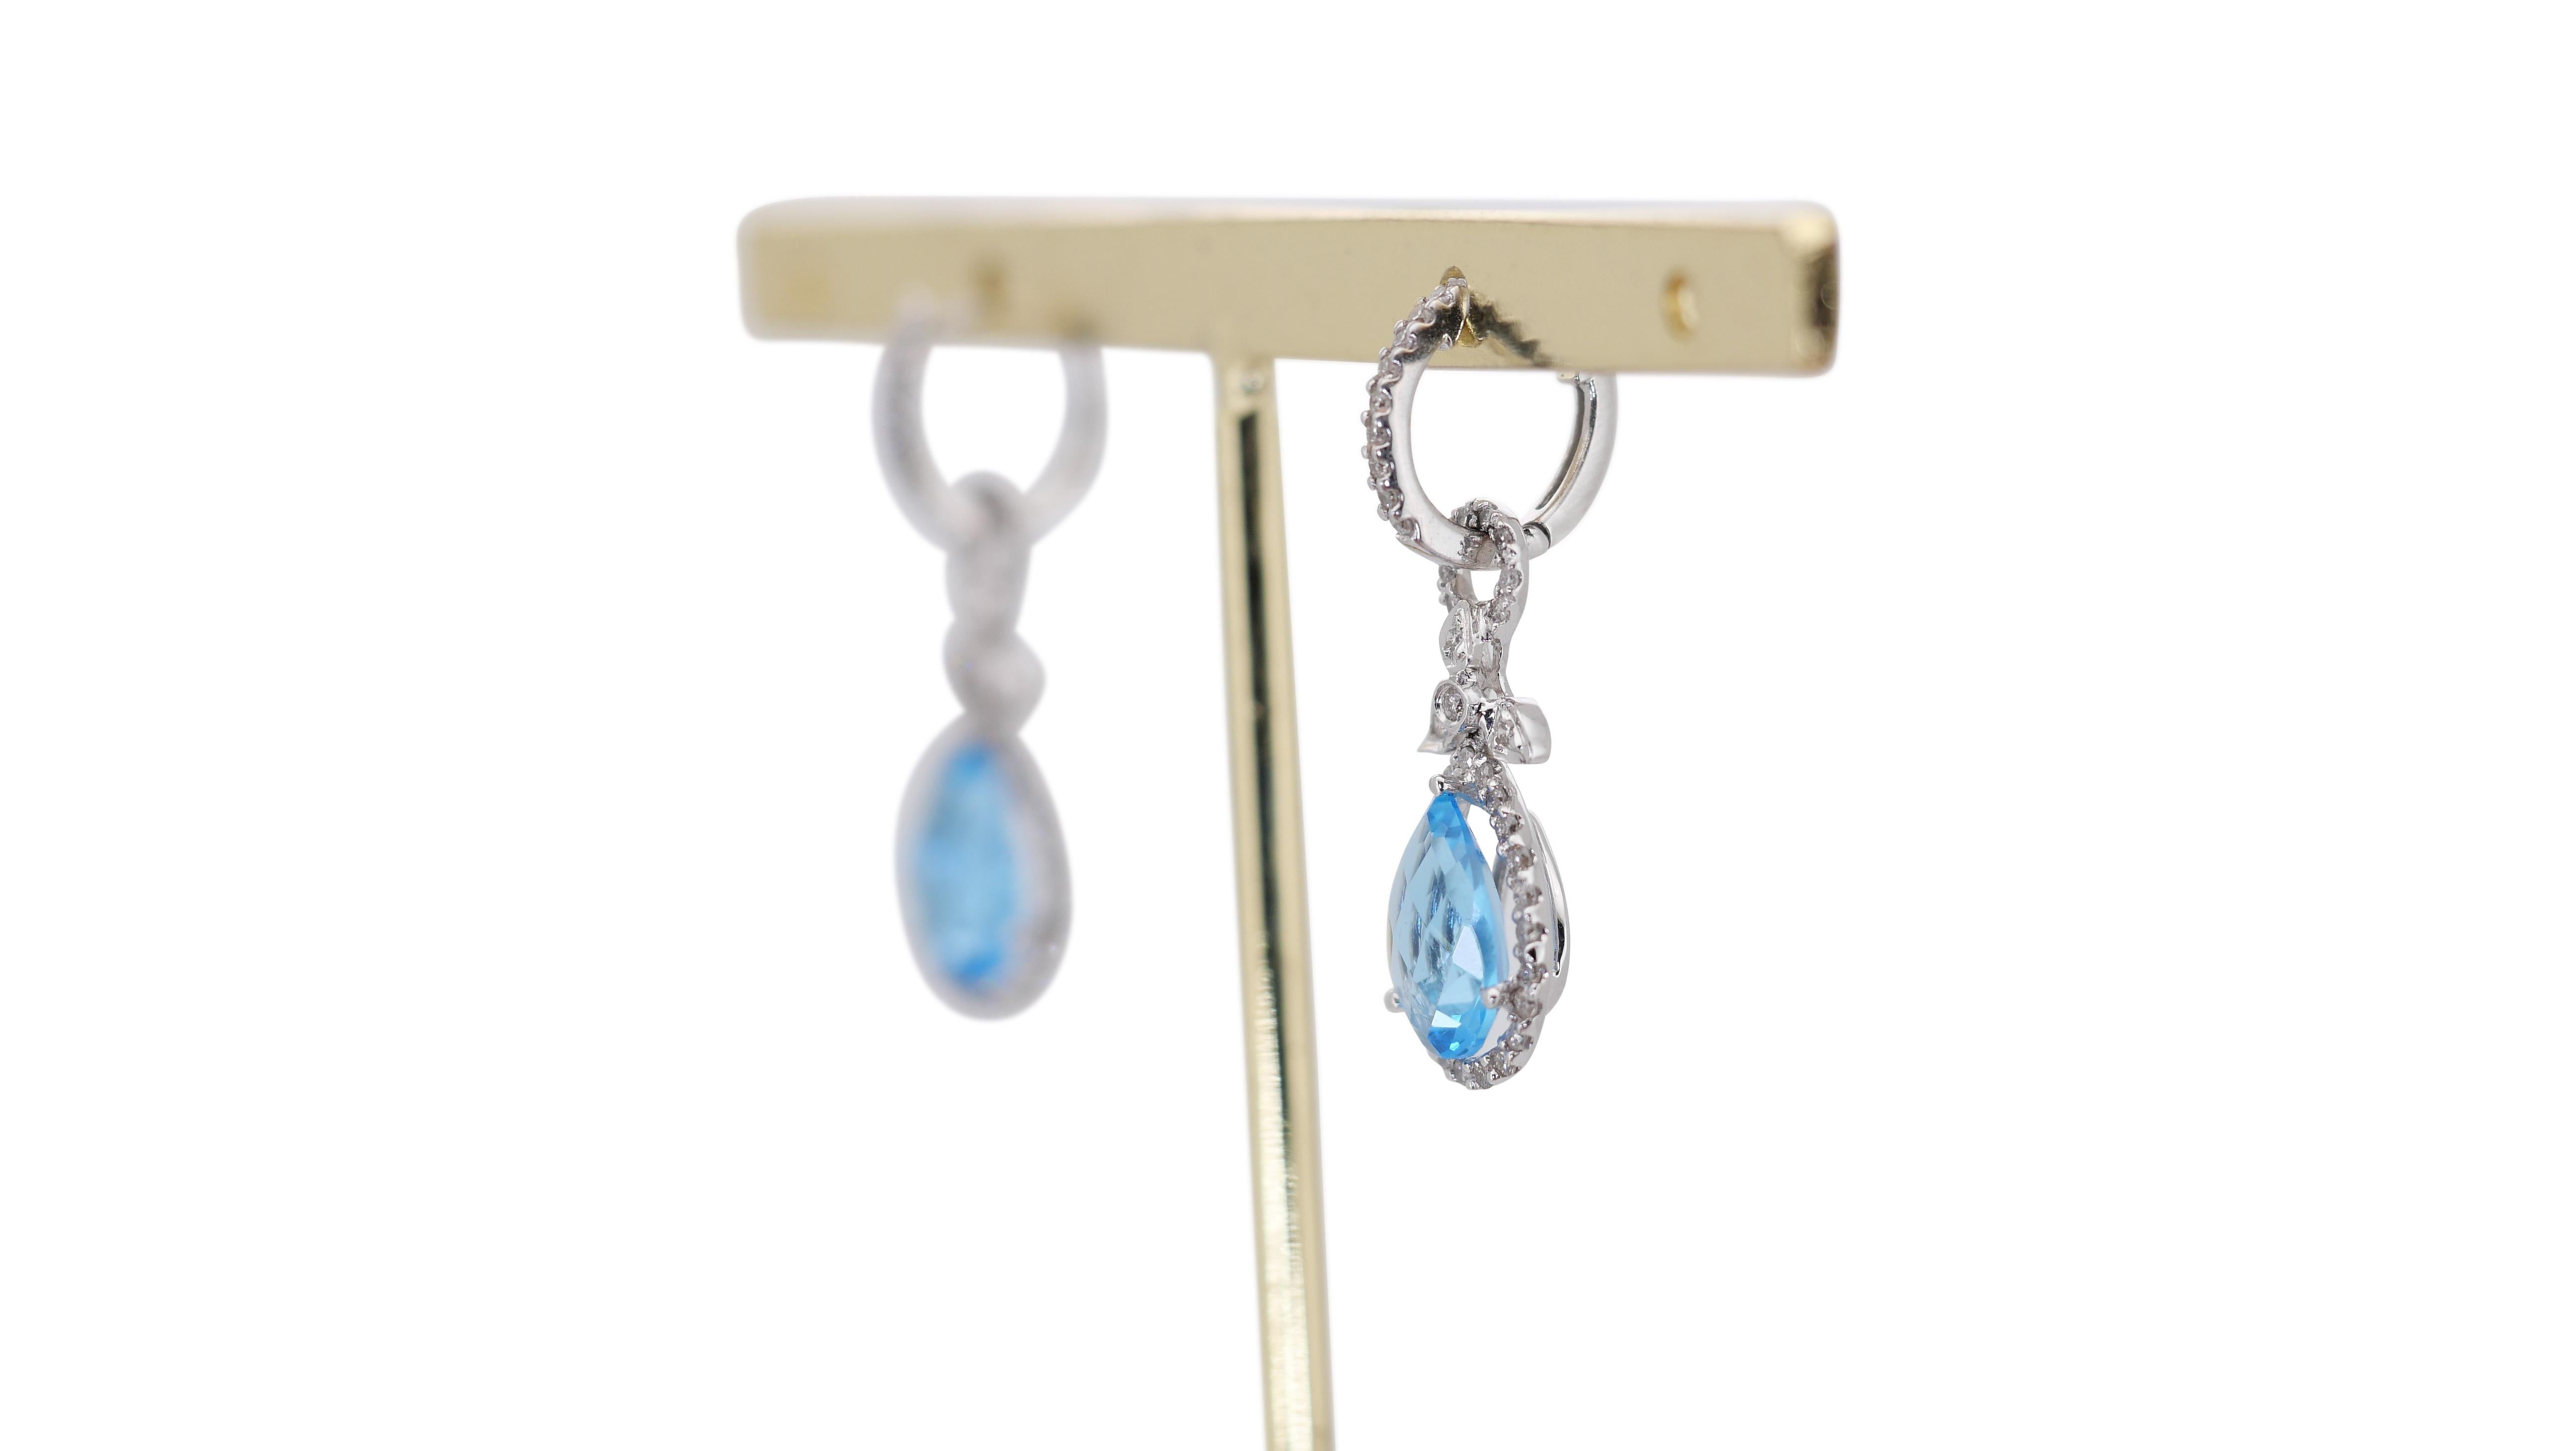 Luxurious 18k White Gold Dangle Earrings with 5 Carat Natural Topaz and Diamonds 3